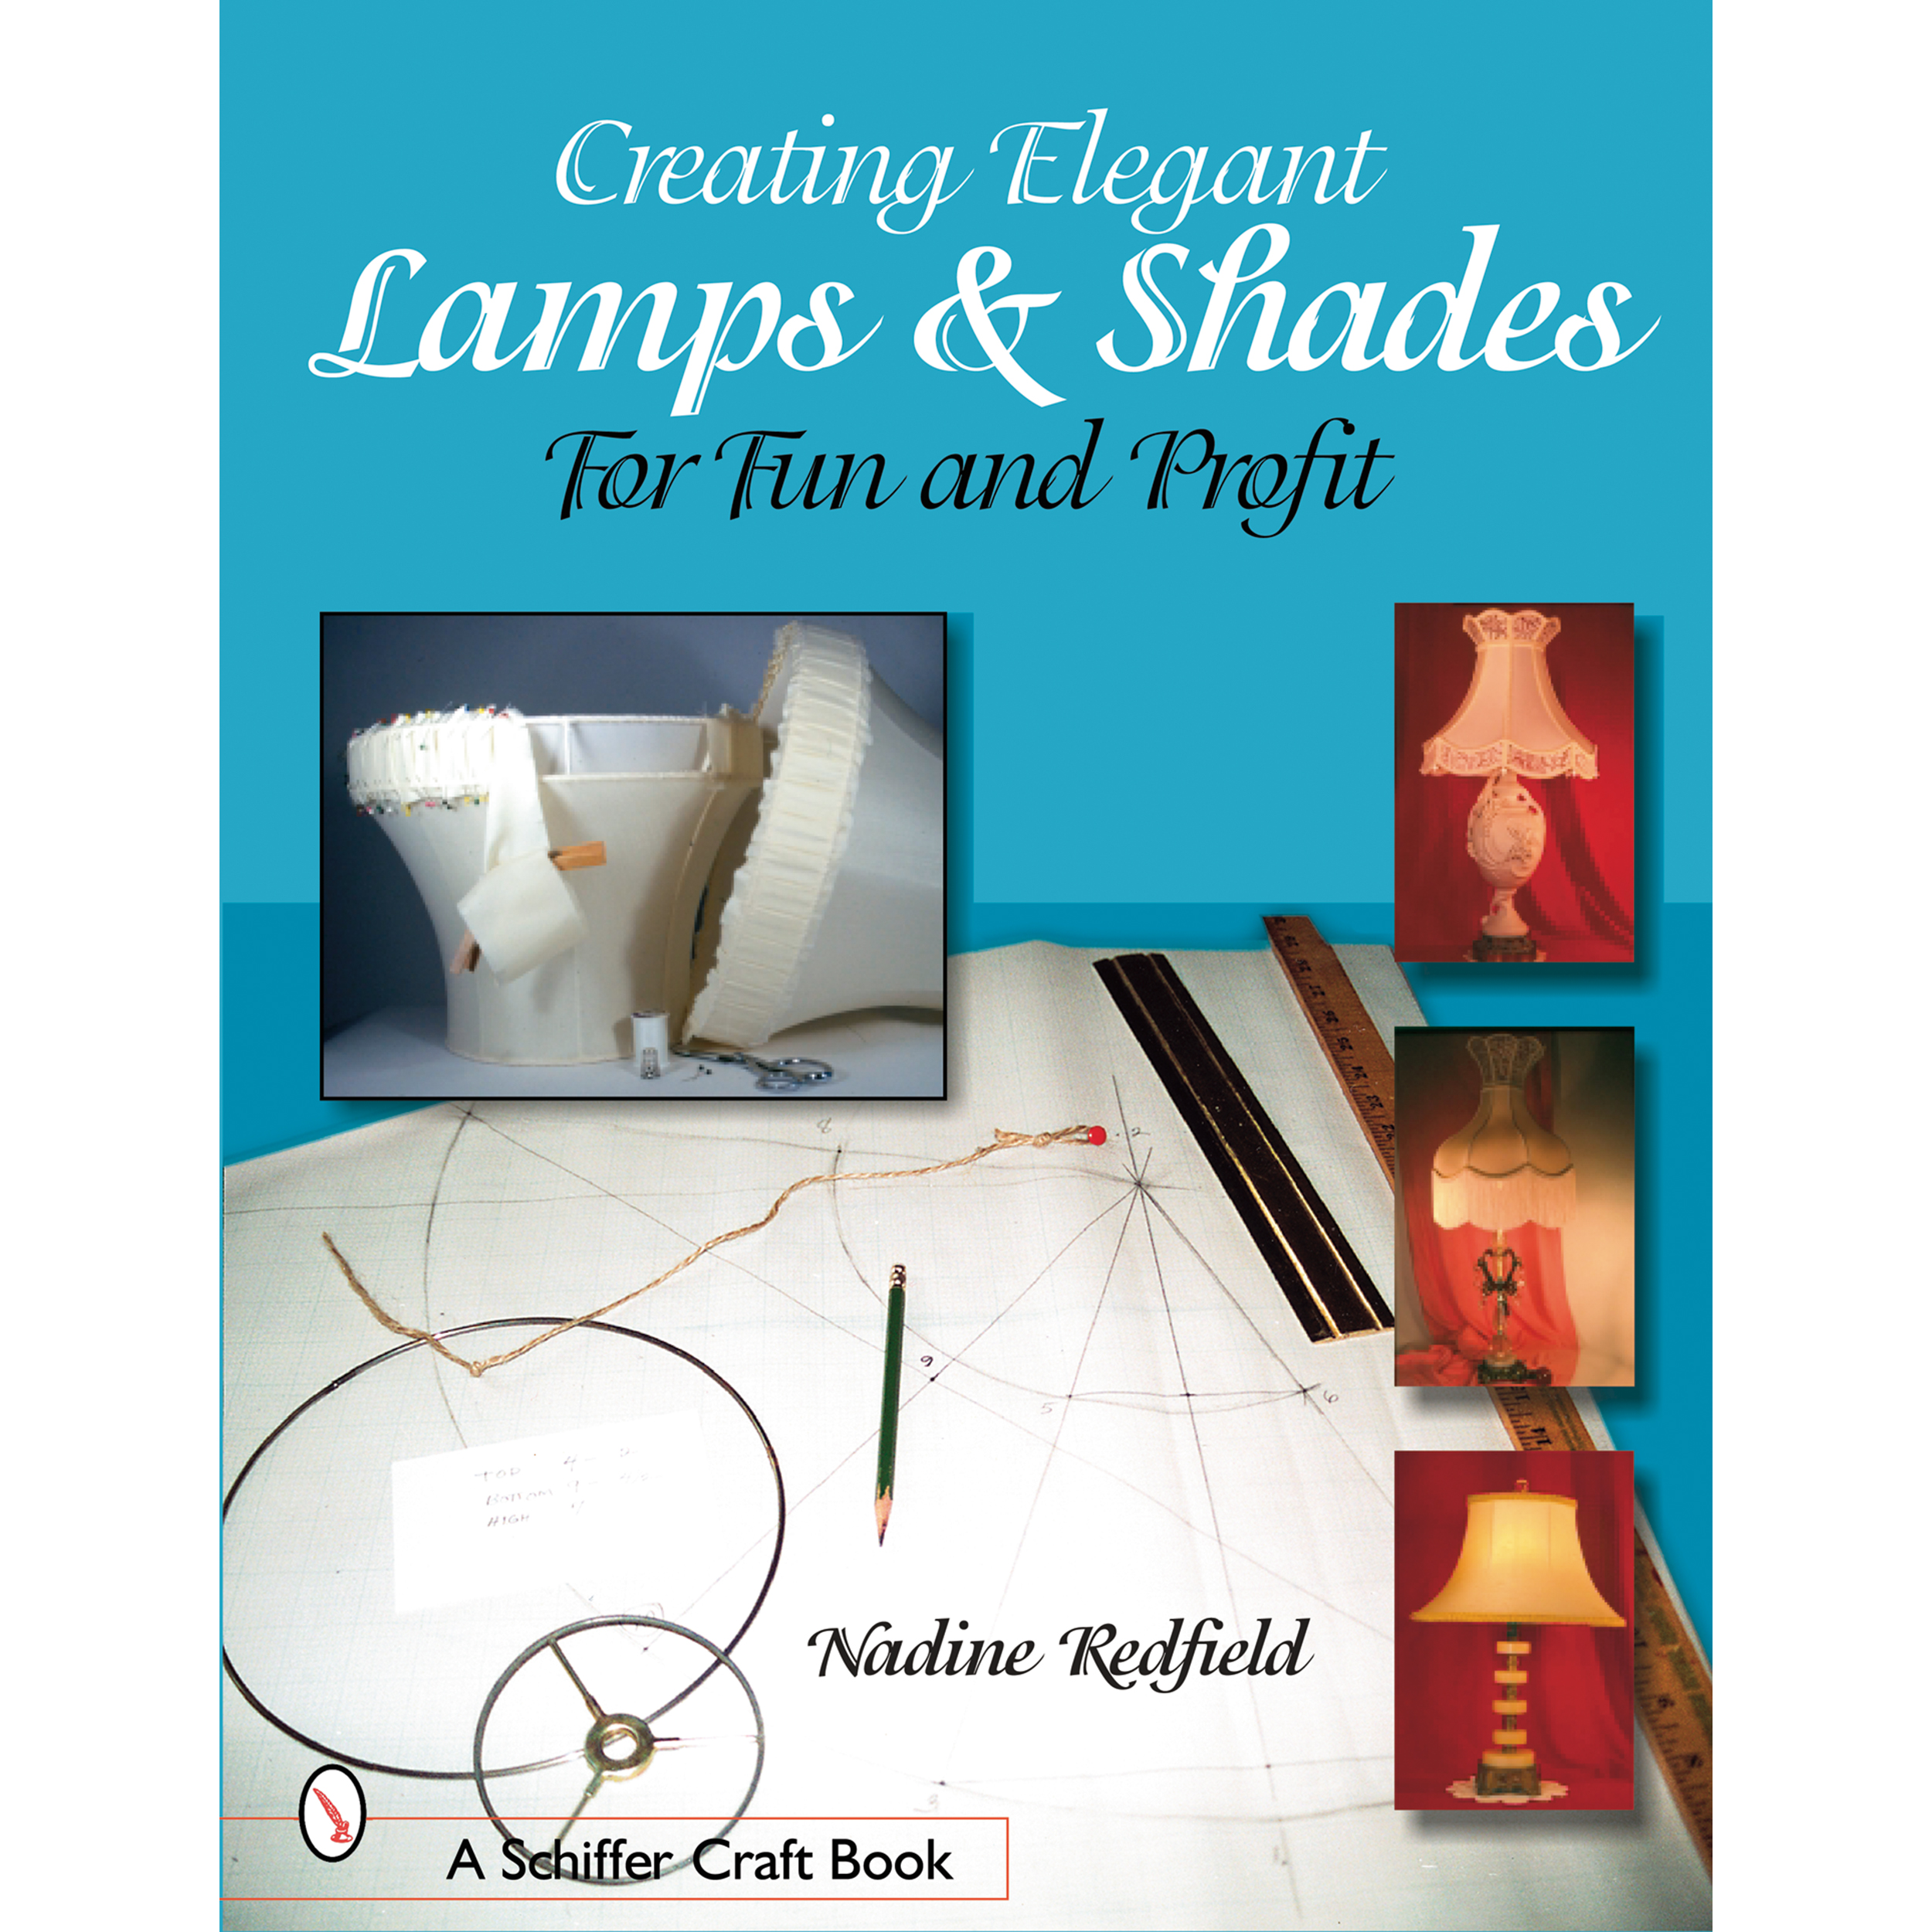 Creating Elegant Lamps & Shades: For Fun And Profit